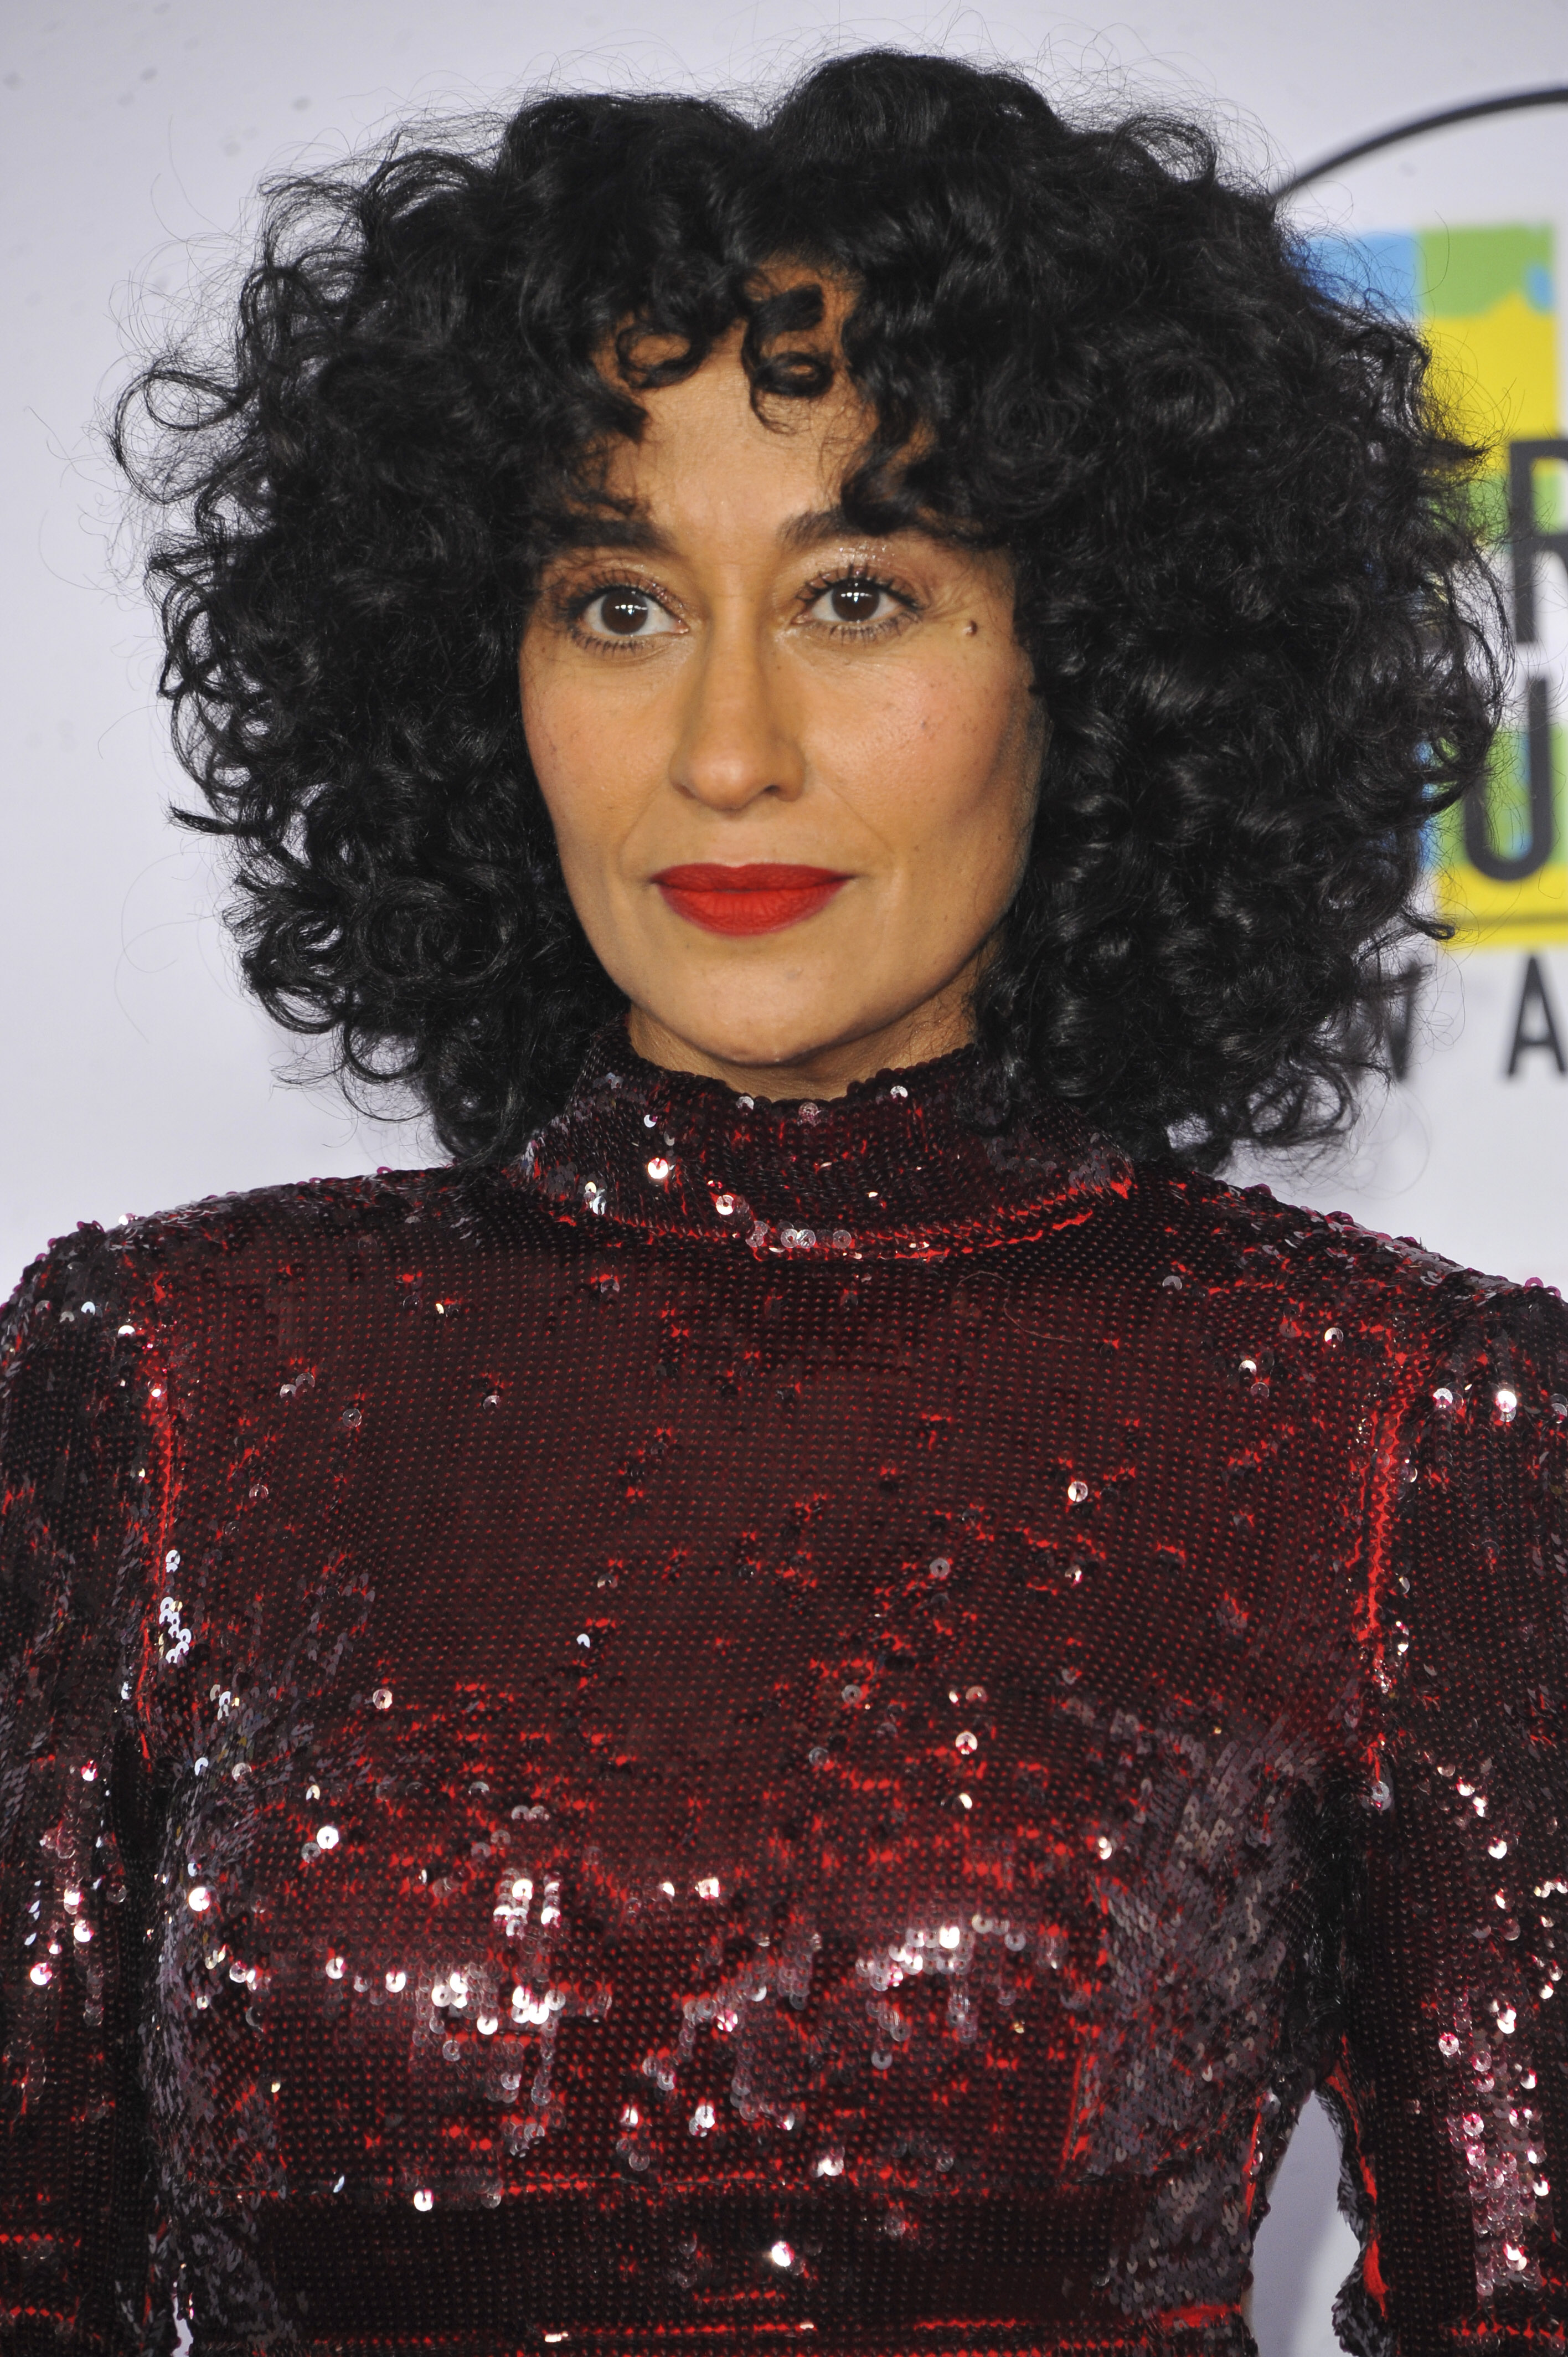 Tracee Ellis Ross at the 2017 AMA's